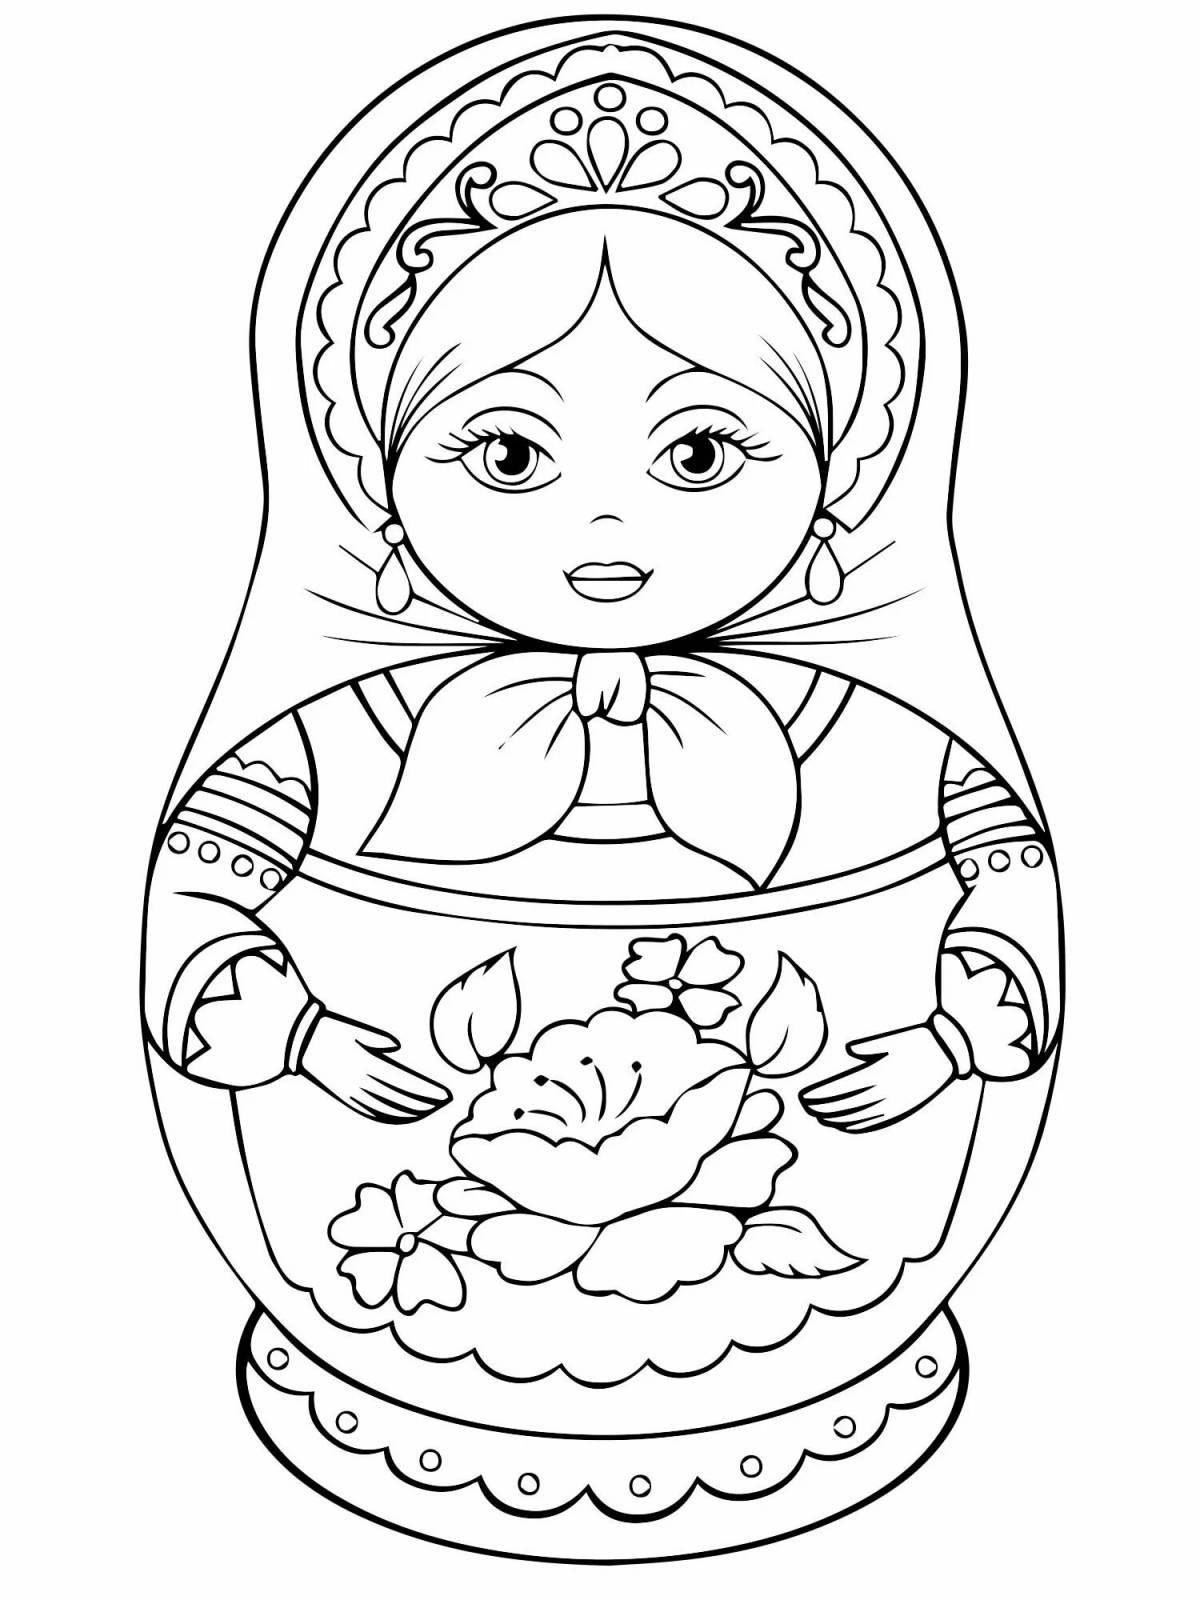 Creative Russian matryoshka coloring book for 6-7 year olds